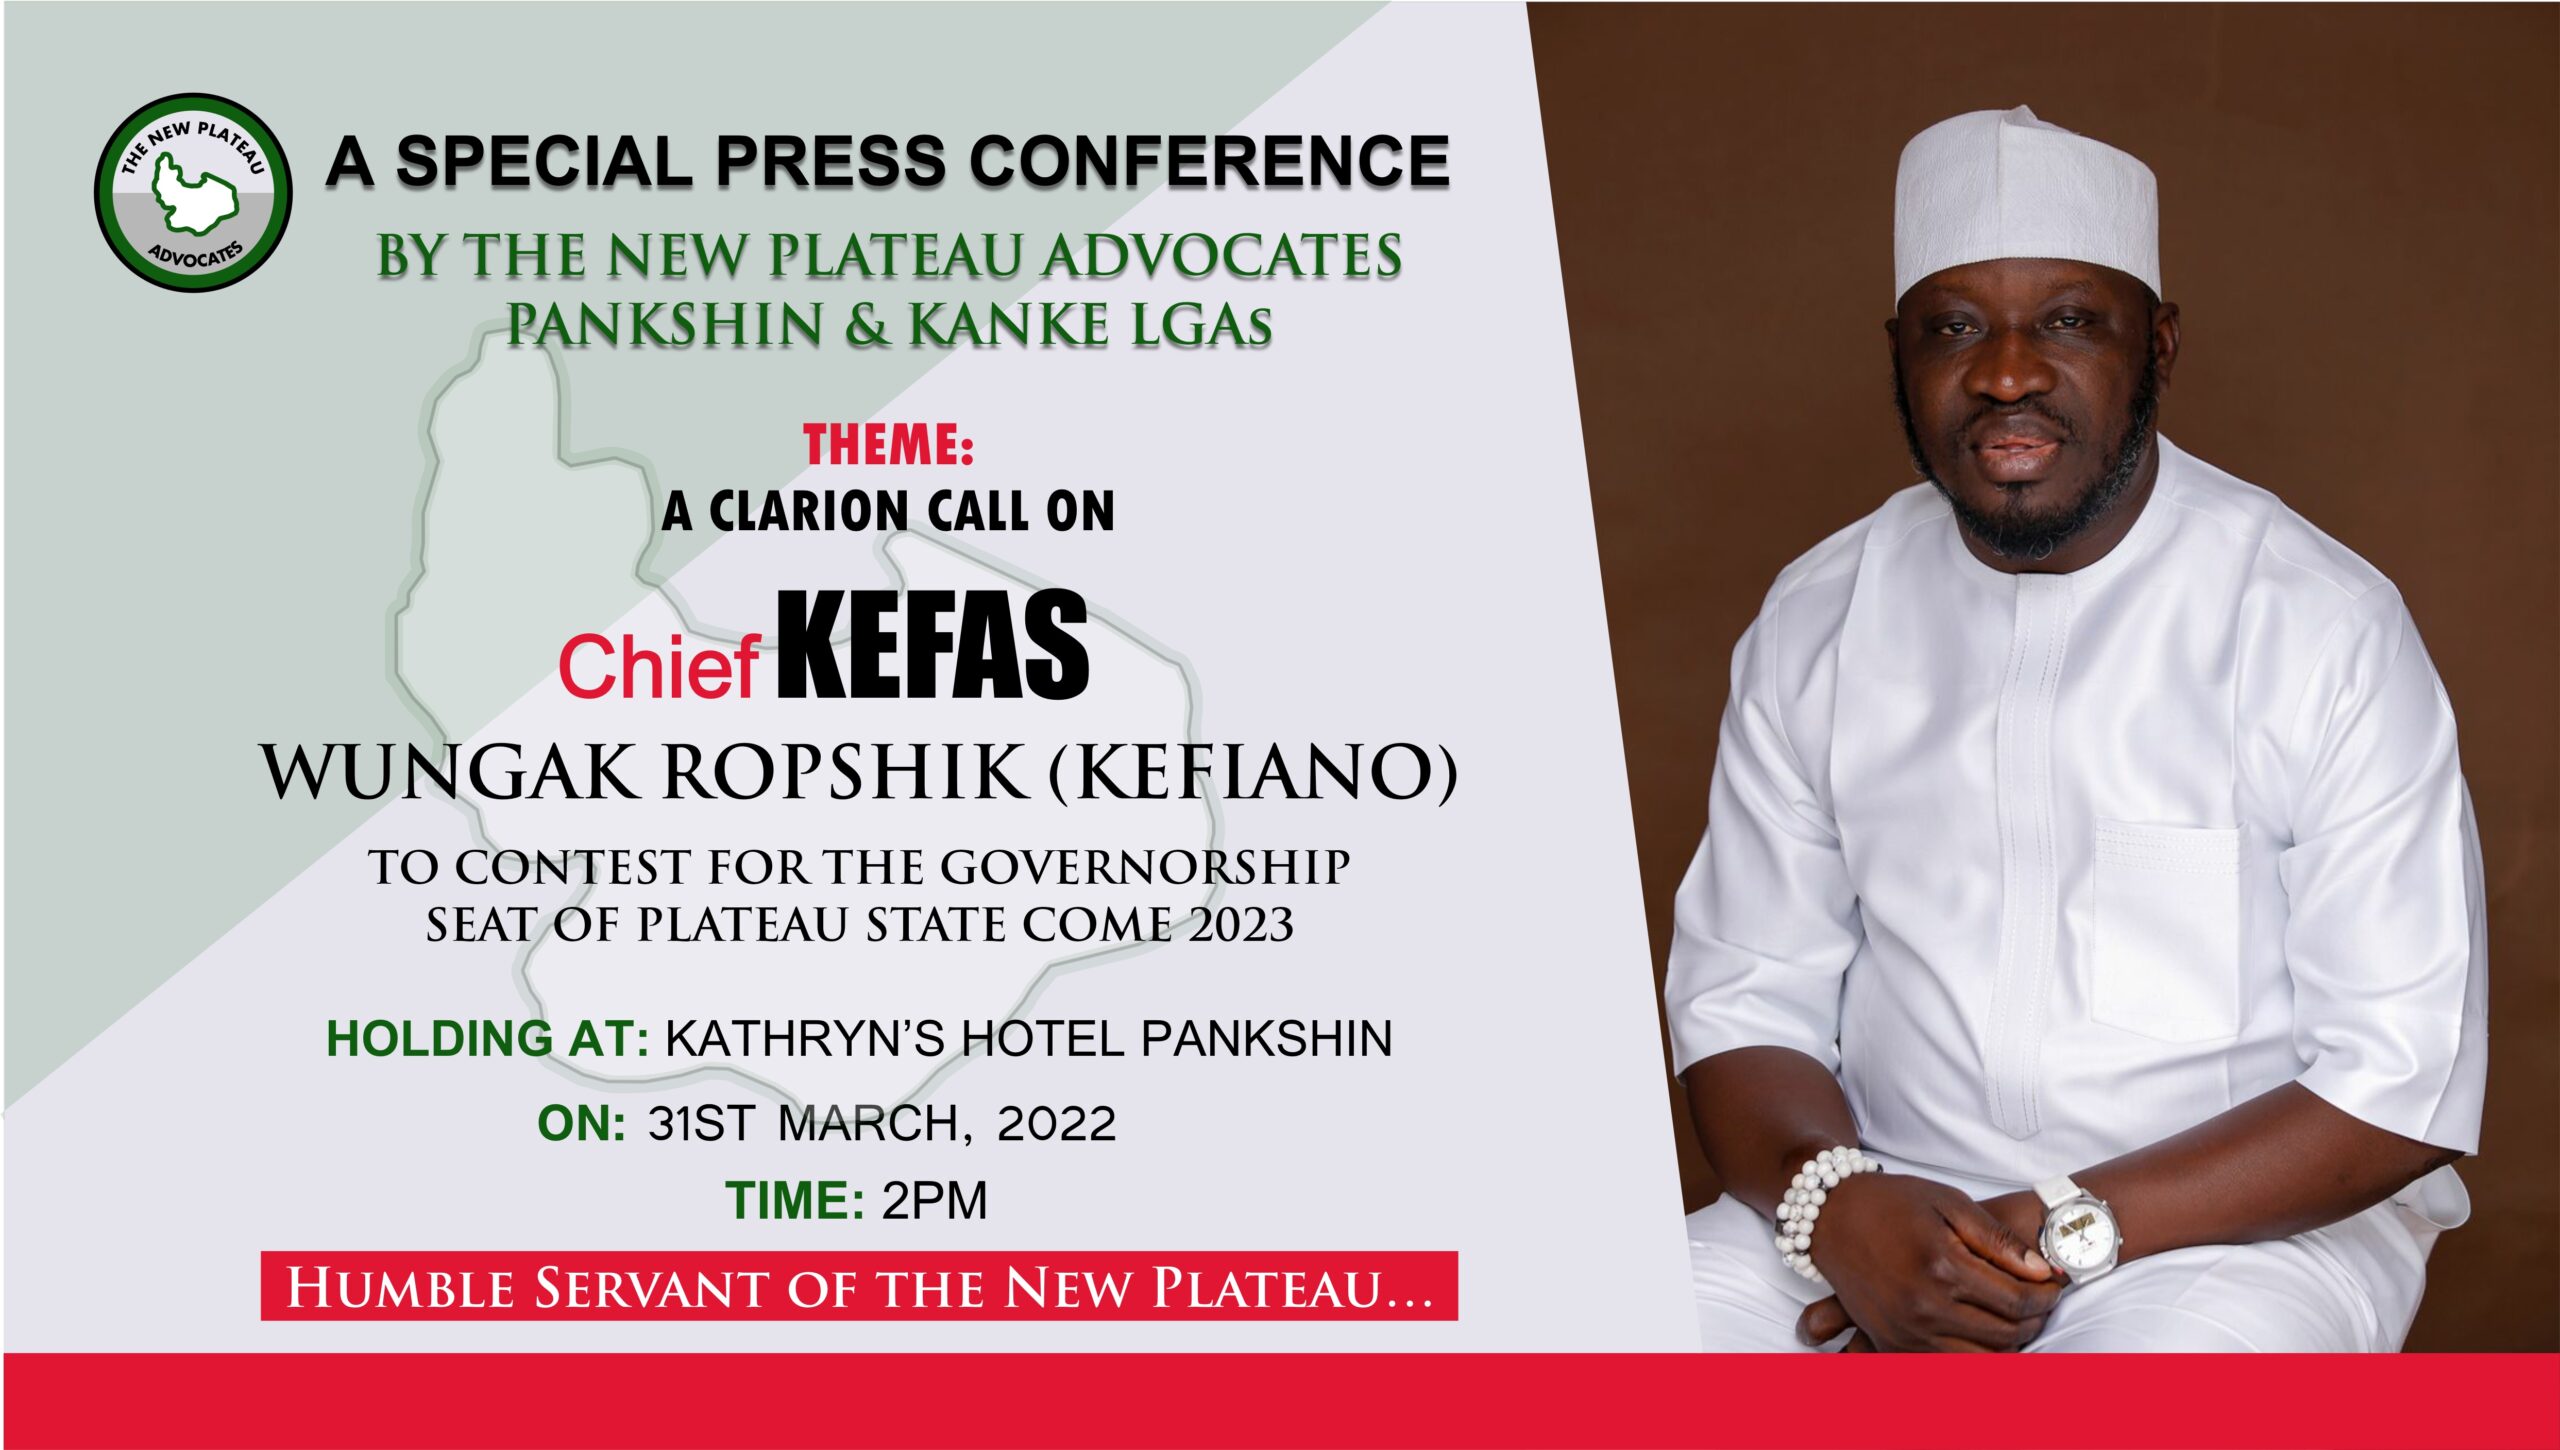 Plateau 2023 Group Prevails on Chief Kefas Ropshik “Kefiano” to